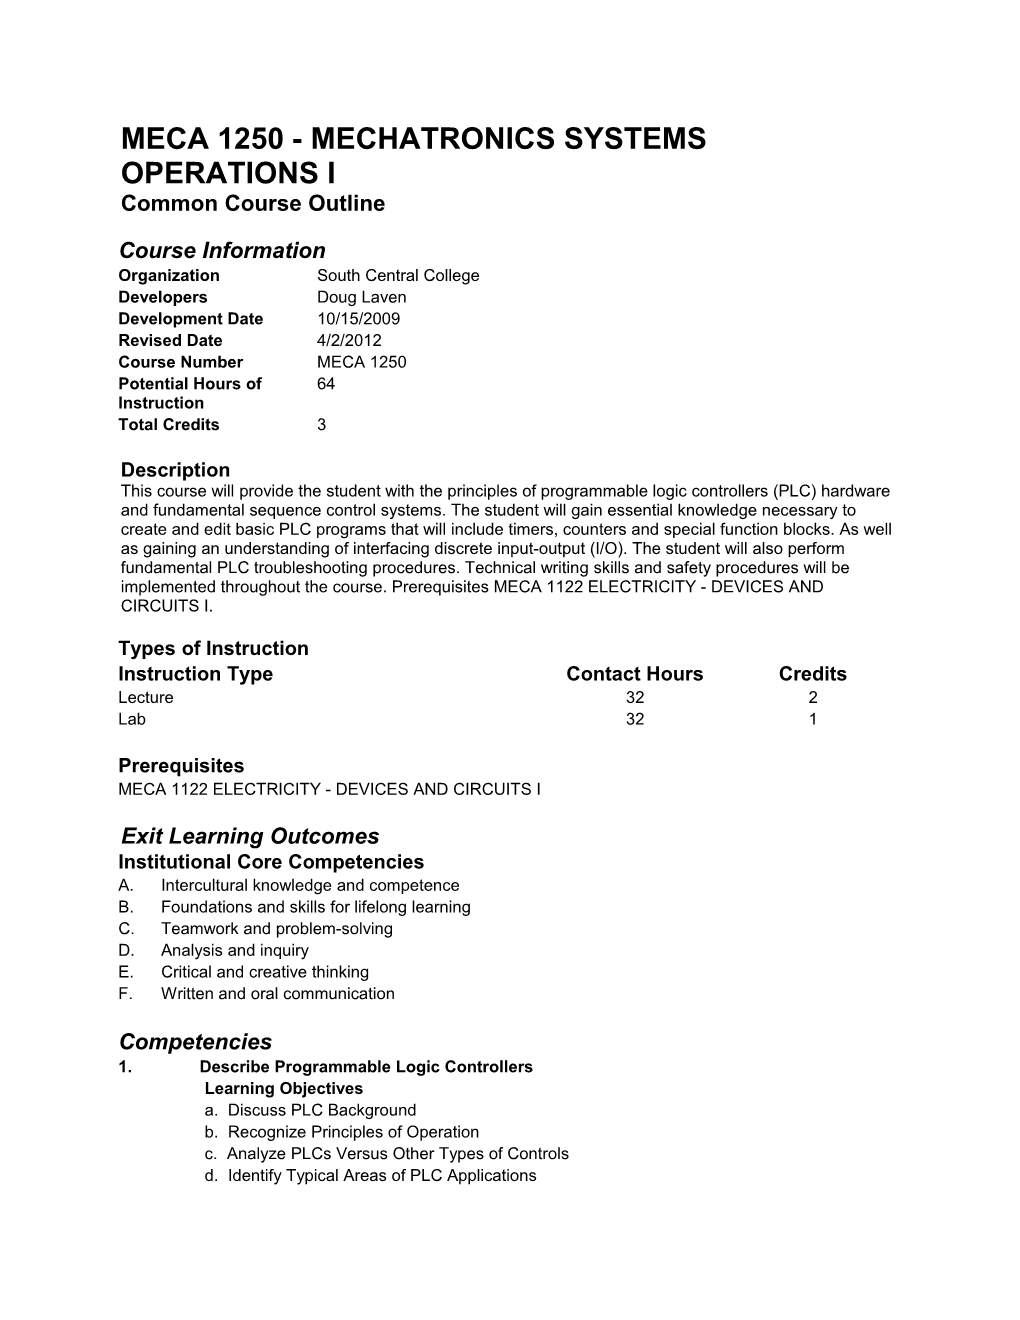 MECA 1250 - MECHATRONICS SYSTEMS OPERATIONS I Common Course Outline